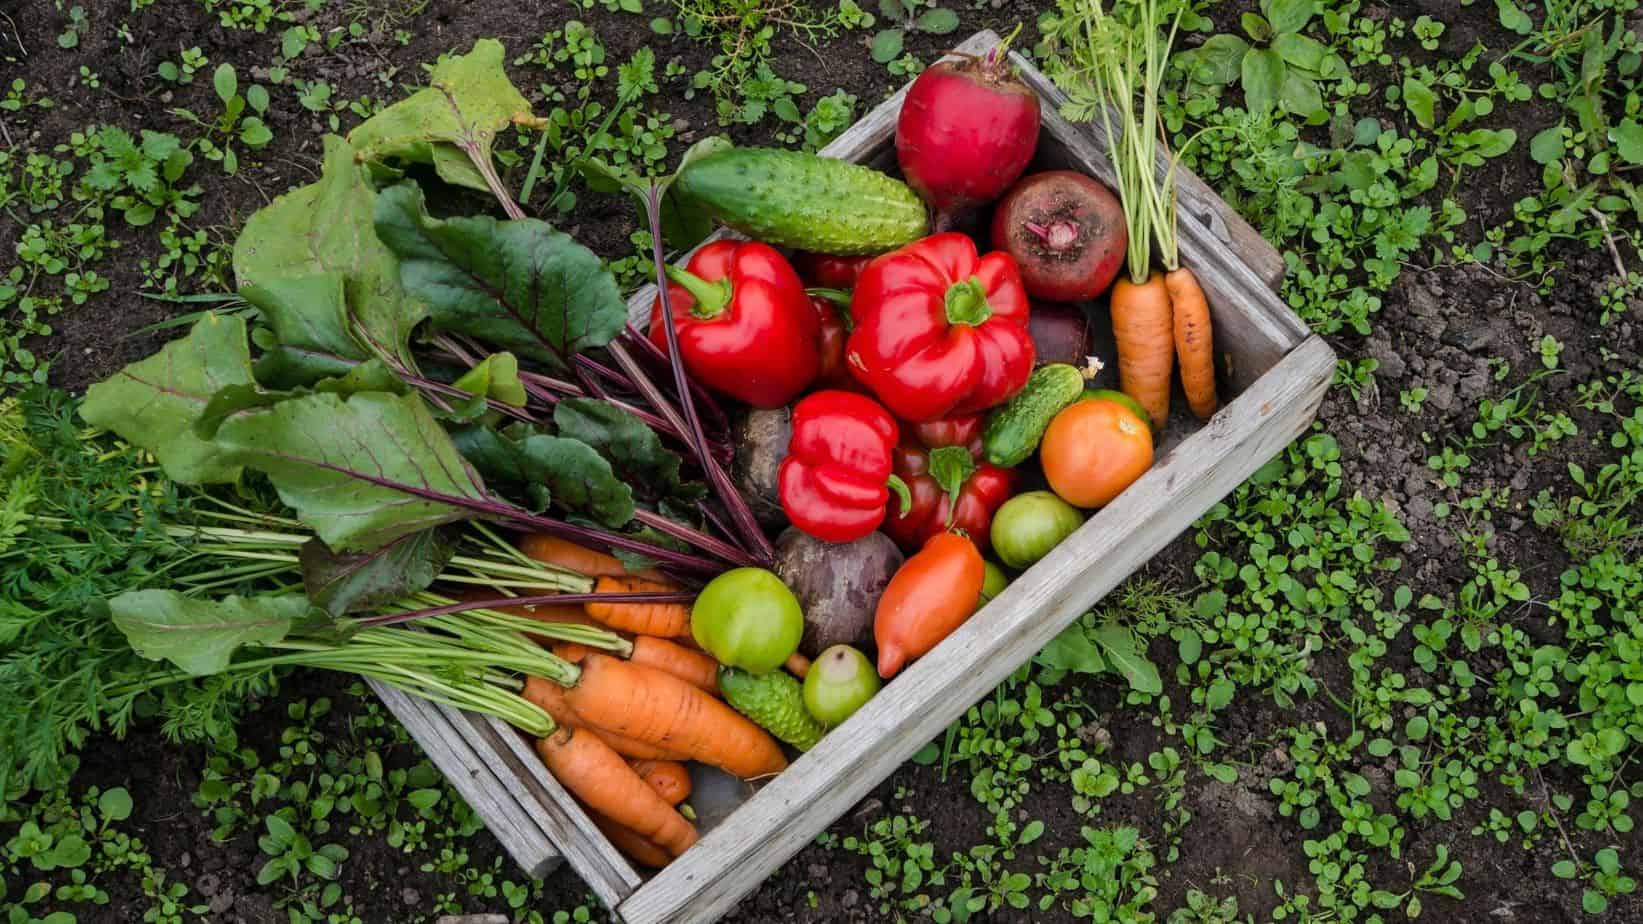 Organic Gardening tips for the family.Would you like to start a fresh organic garden ? Here are 10 top tips to get you started. | My Family Ties